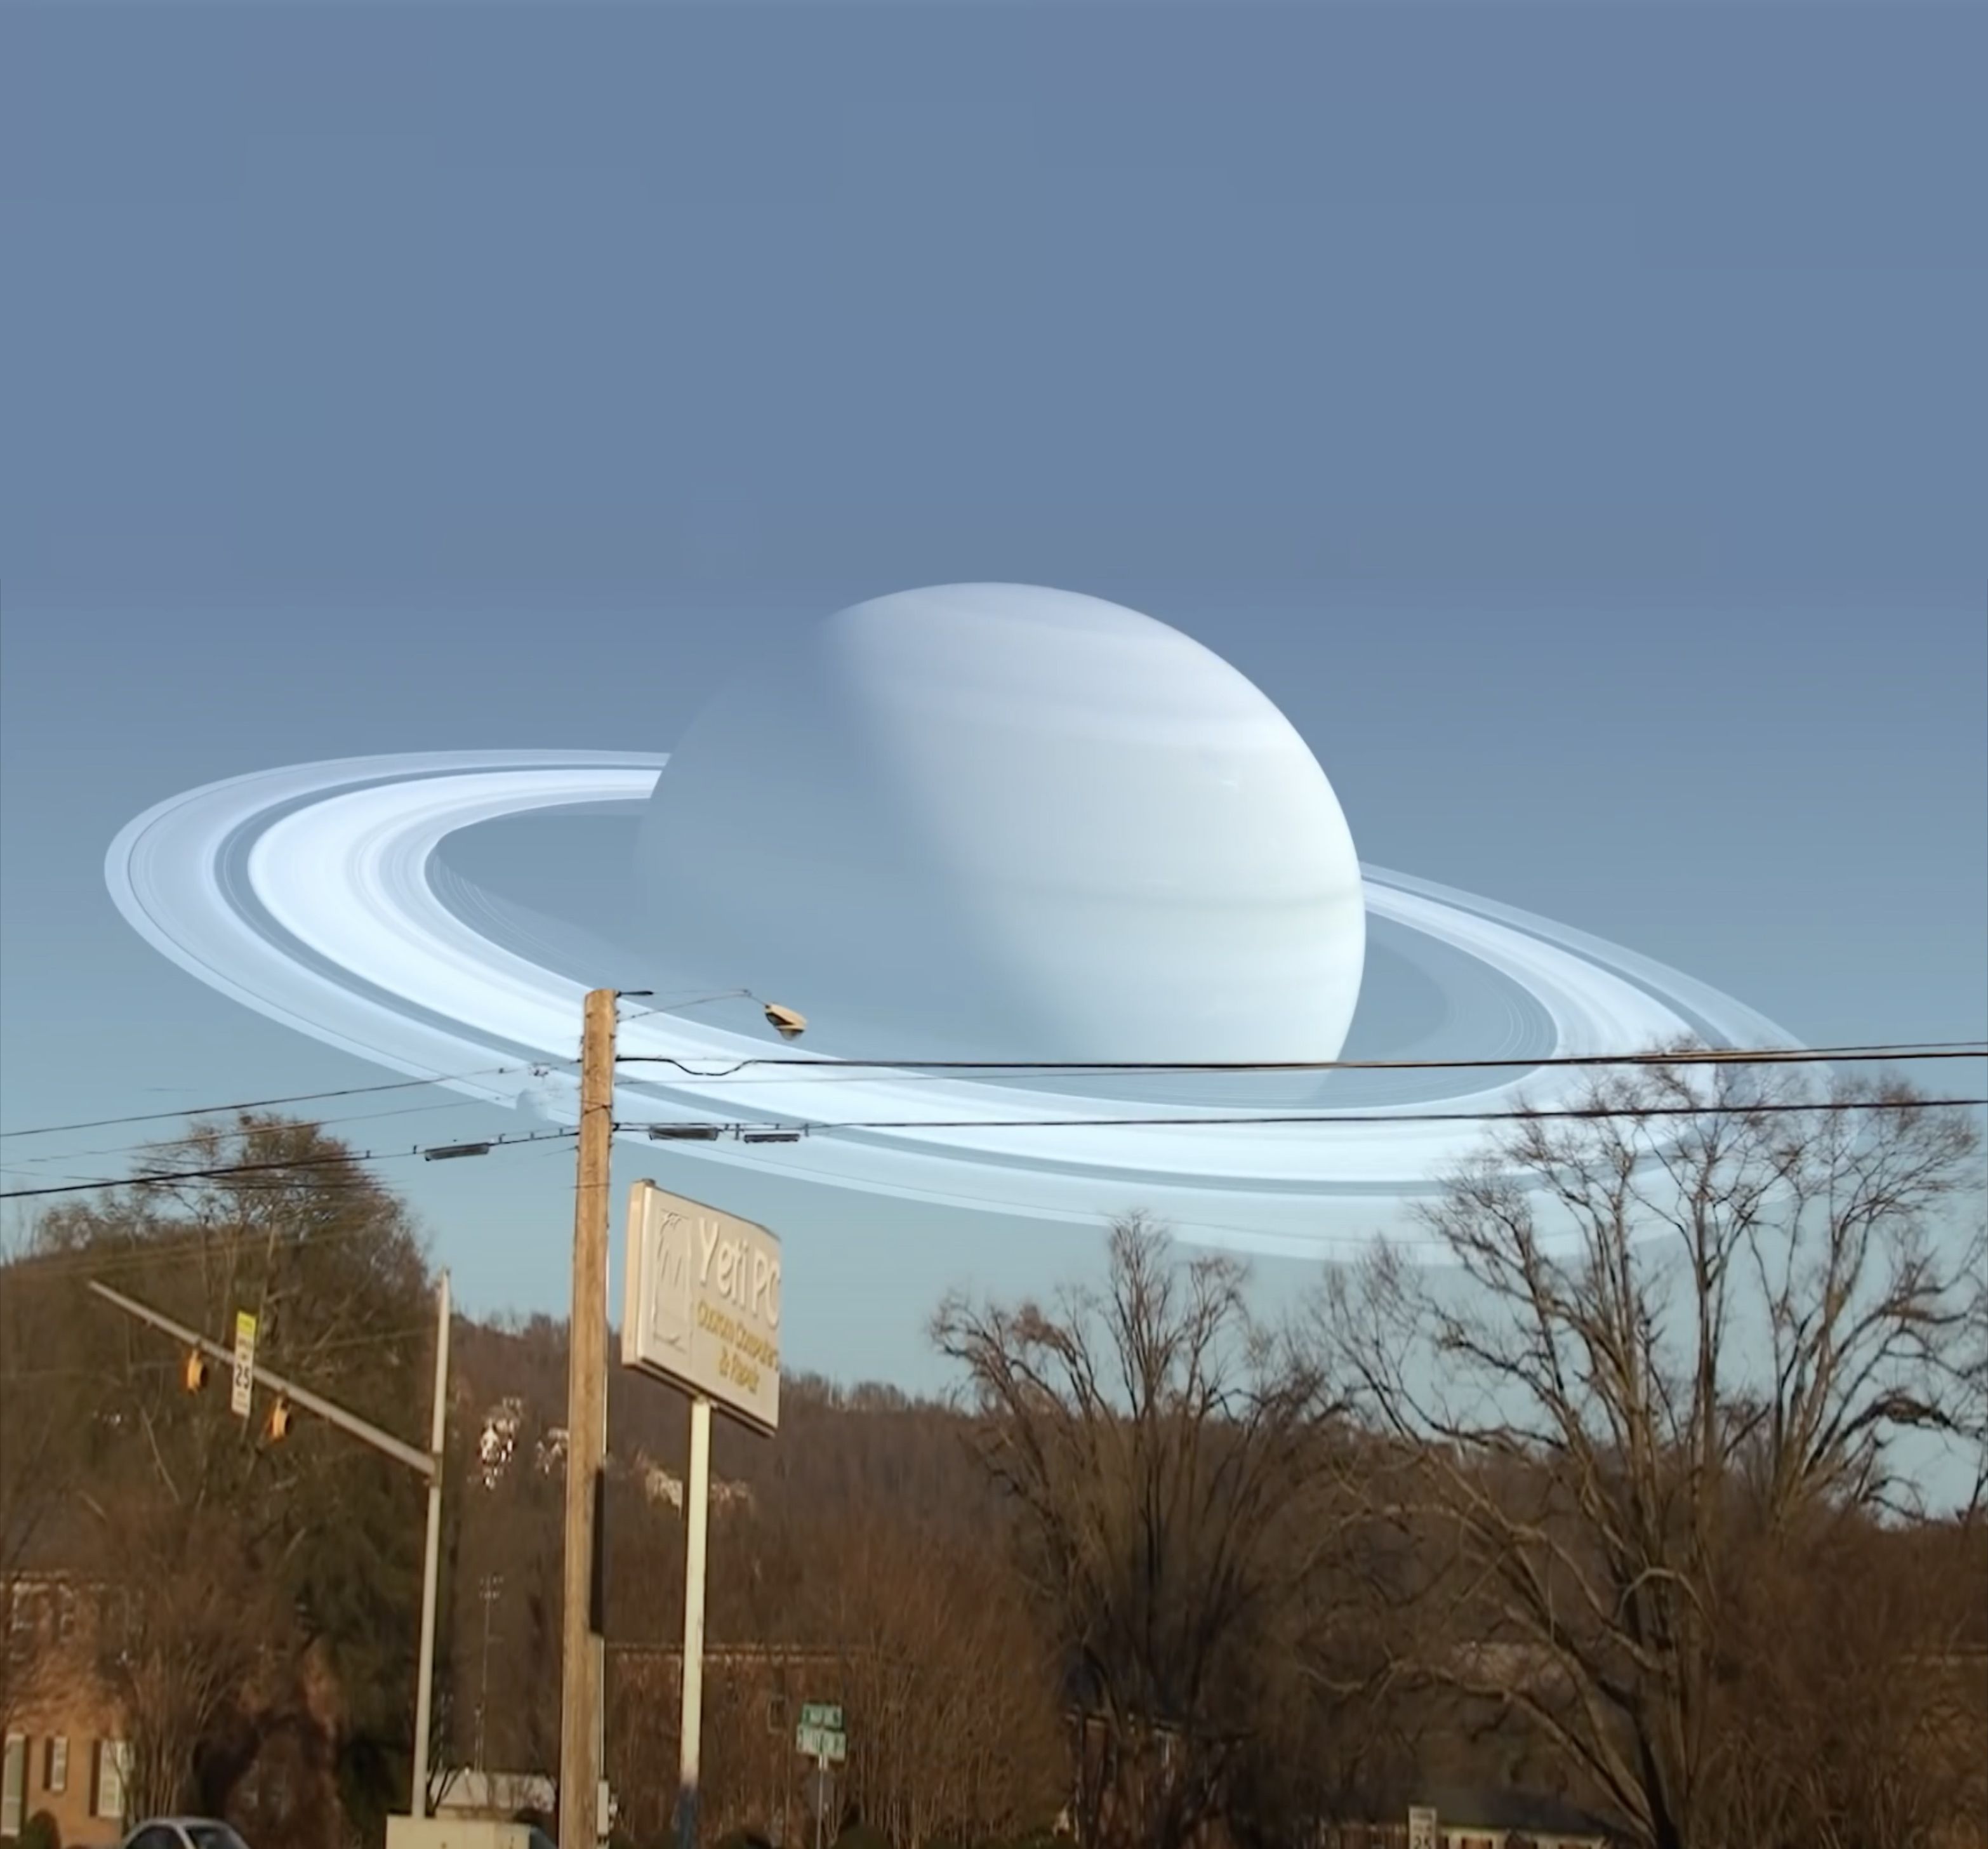 This Viral Video Reveals What the Sky Would Look Like if Planets Replaced the Moon